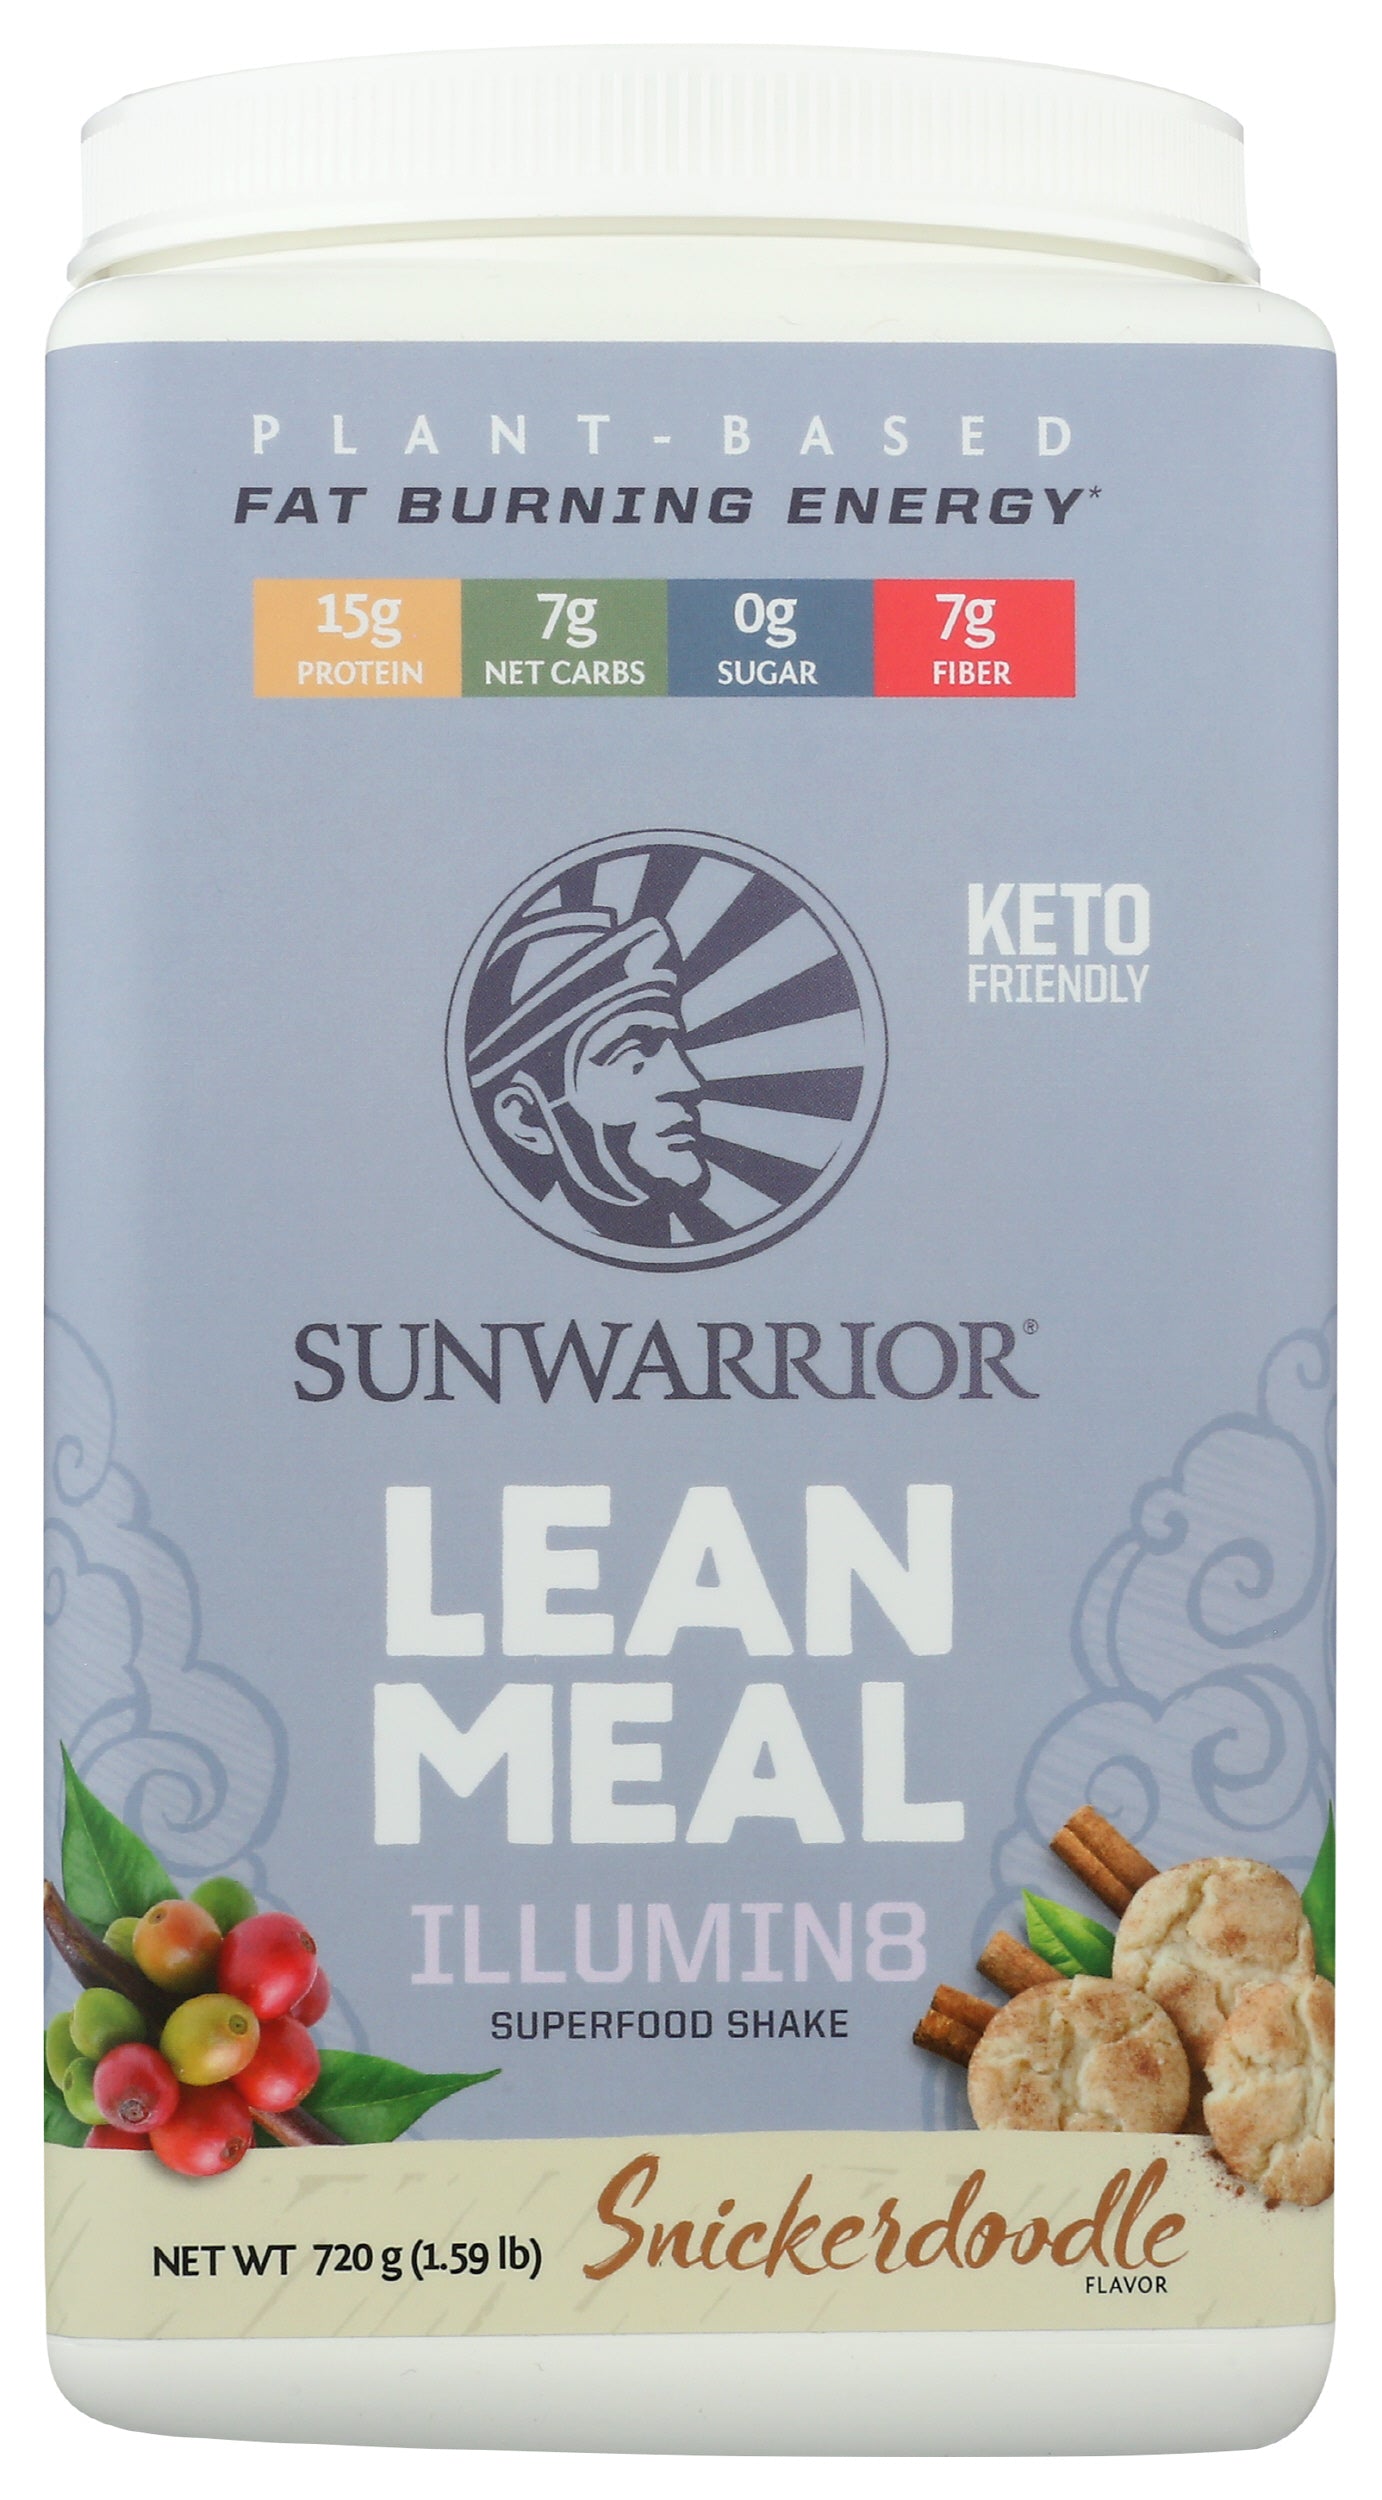 Sunwarrior Lean Meal Illumin8 Snickerdoodle Flavor 720g Front of Tub